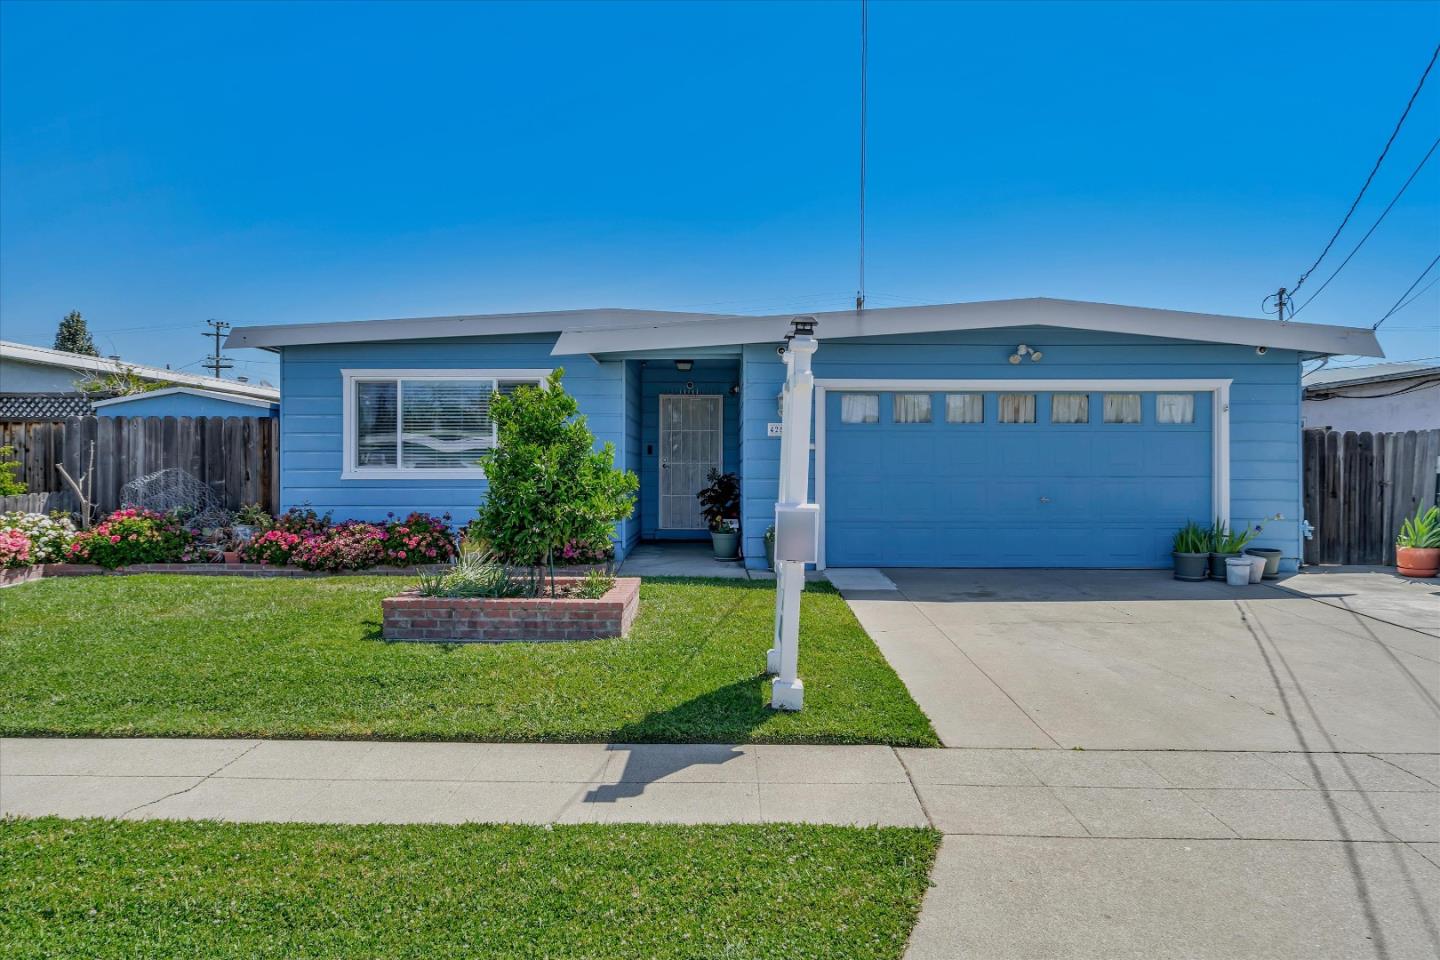 Photo of 42554 Charleston Wy in Fremont, CA